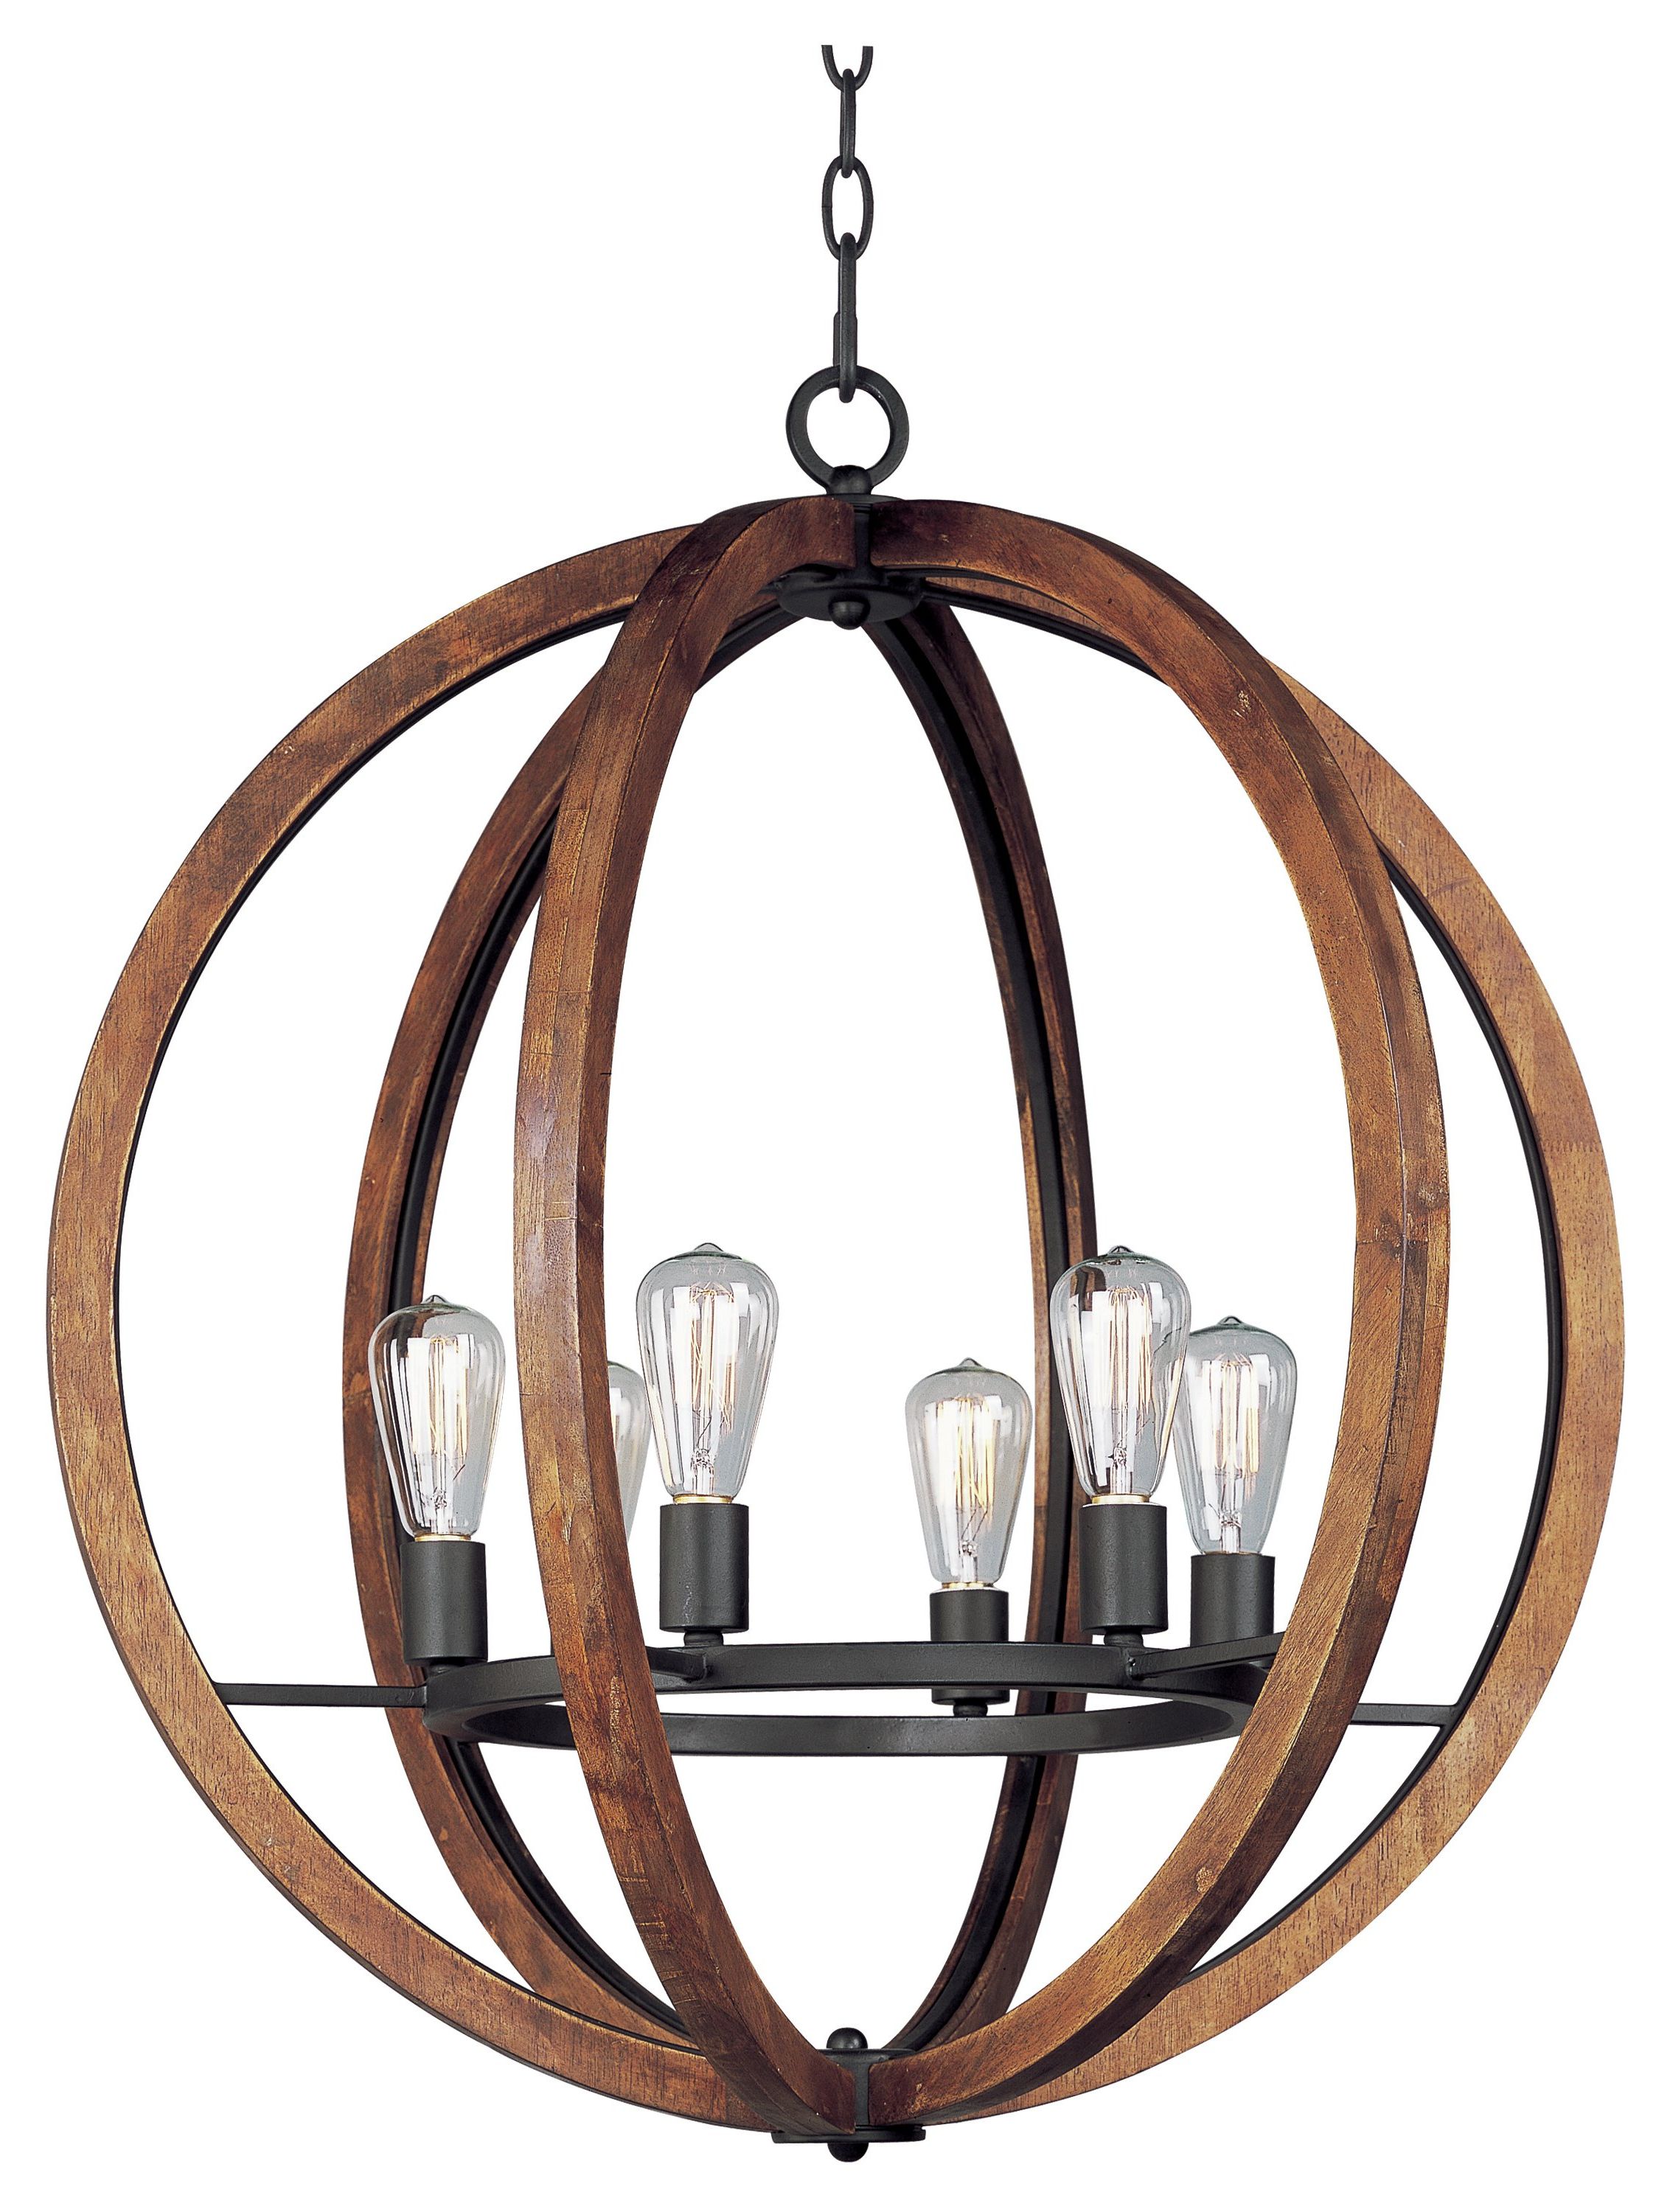 Orly 6 Light Globe Chandelier With Well Known Joon 6 Light Globe Chandeliers (View 4 of 25)